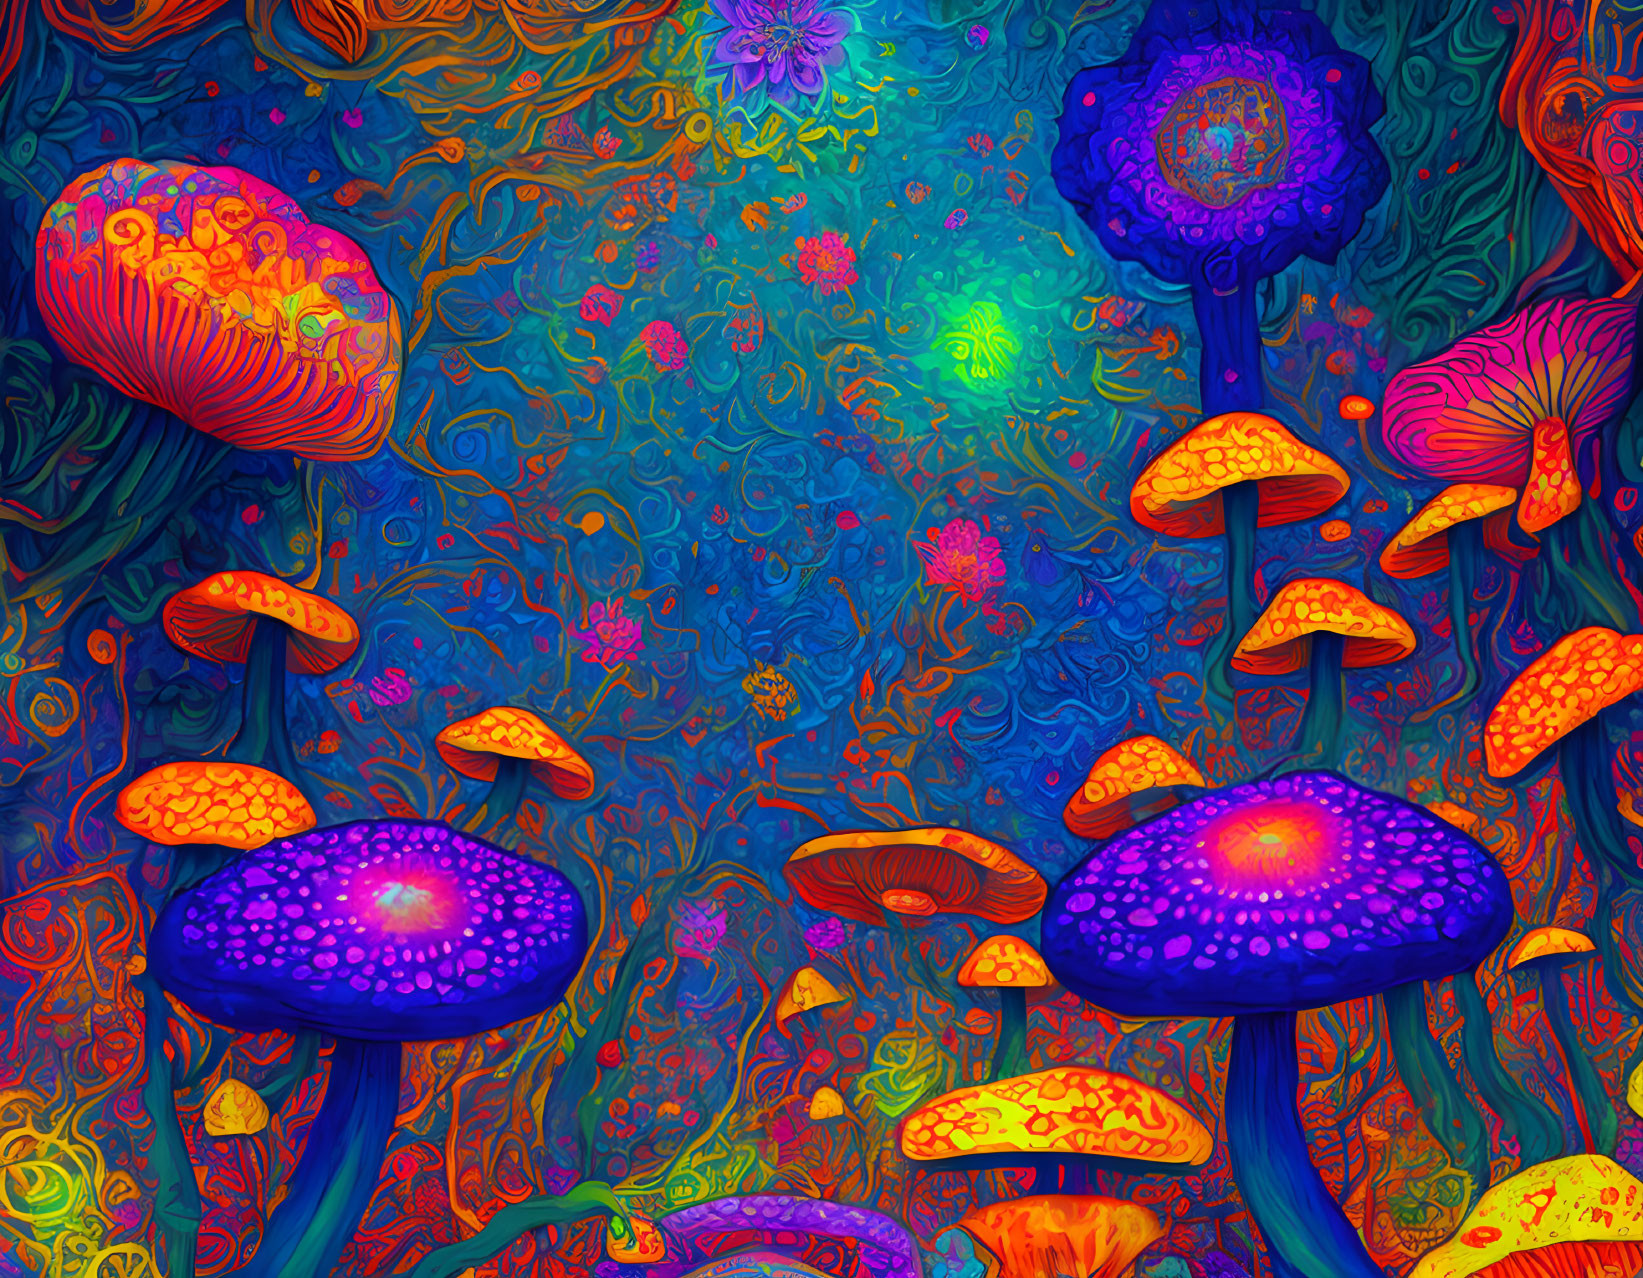 Colorful psychedelic mushroom illustration with intricate patterns